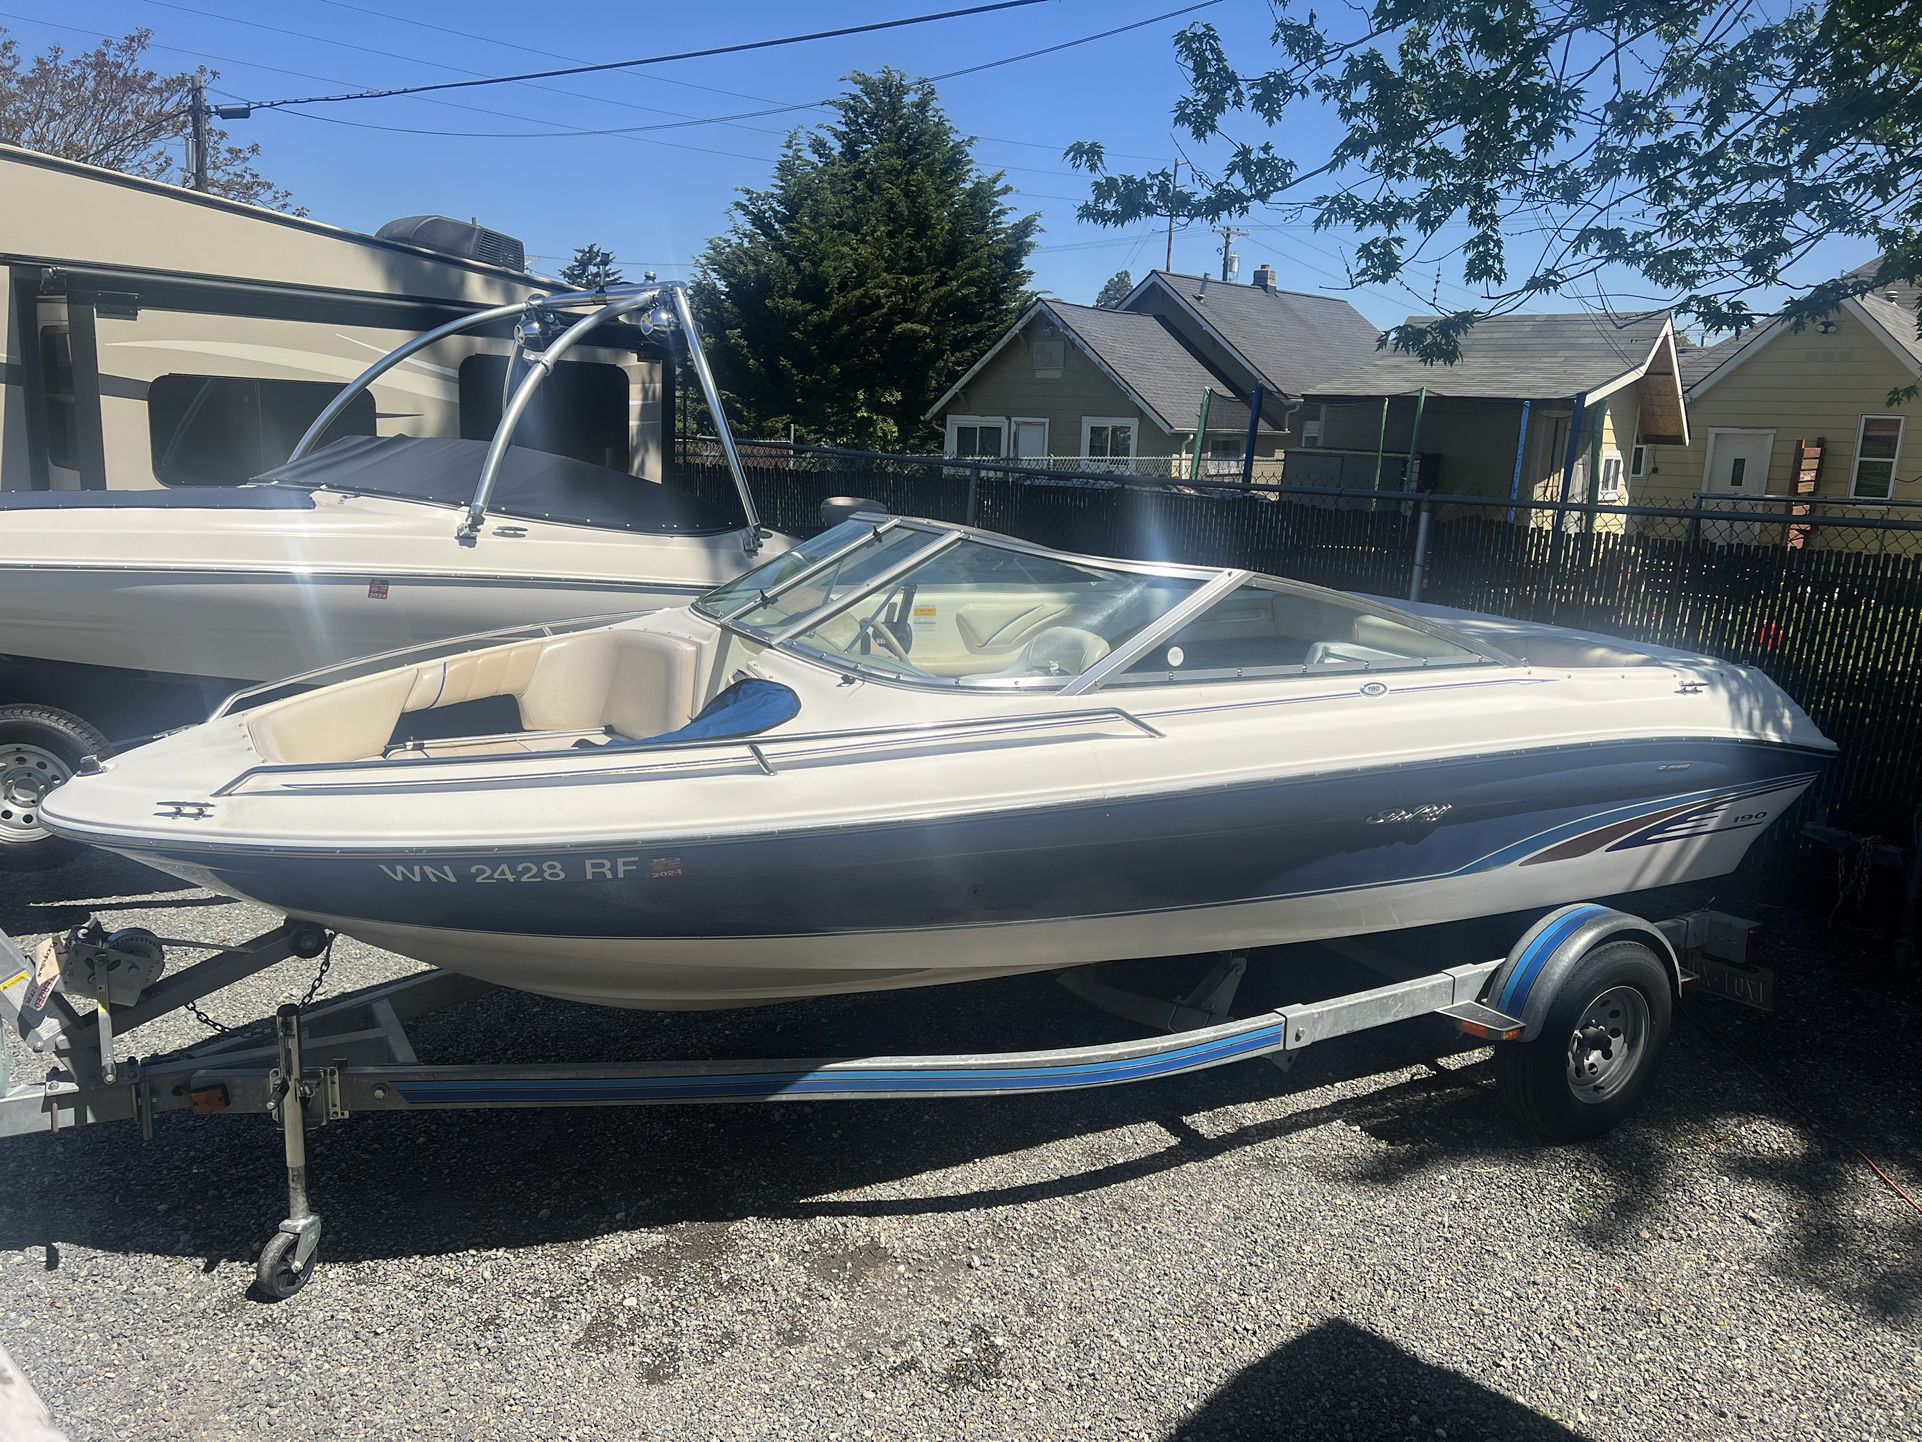 1 owner  fresh water only  1996 Sea Ray 190 open bow  Has been in Lake Wenatchee it’s entire life serviced and winterized every year garage kept durin